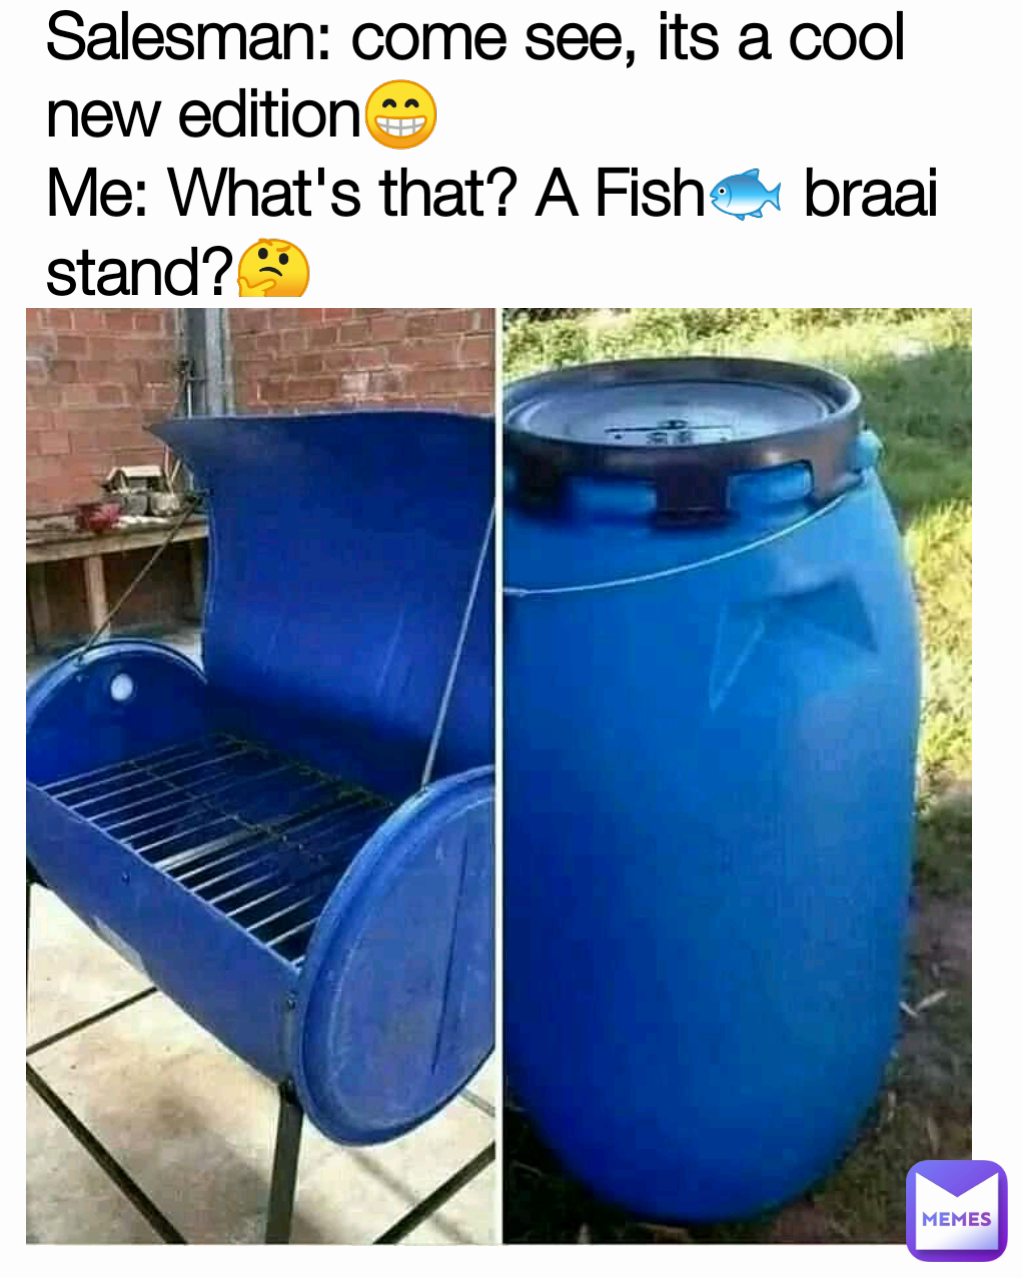 Salesman: come see, its a cool new edition😁
Me: What's that? A Fish🐟 braai stand?🤔